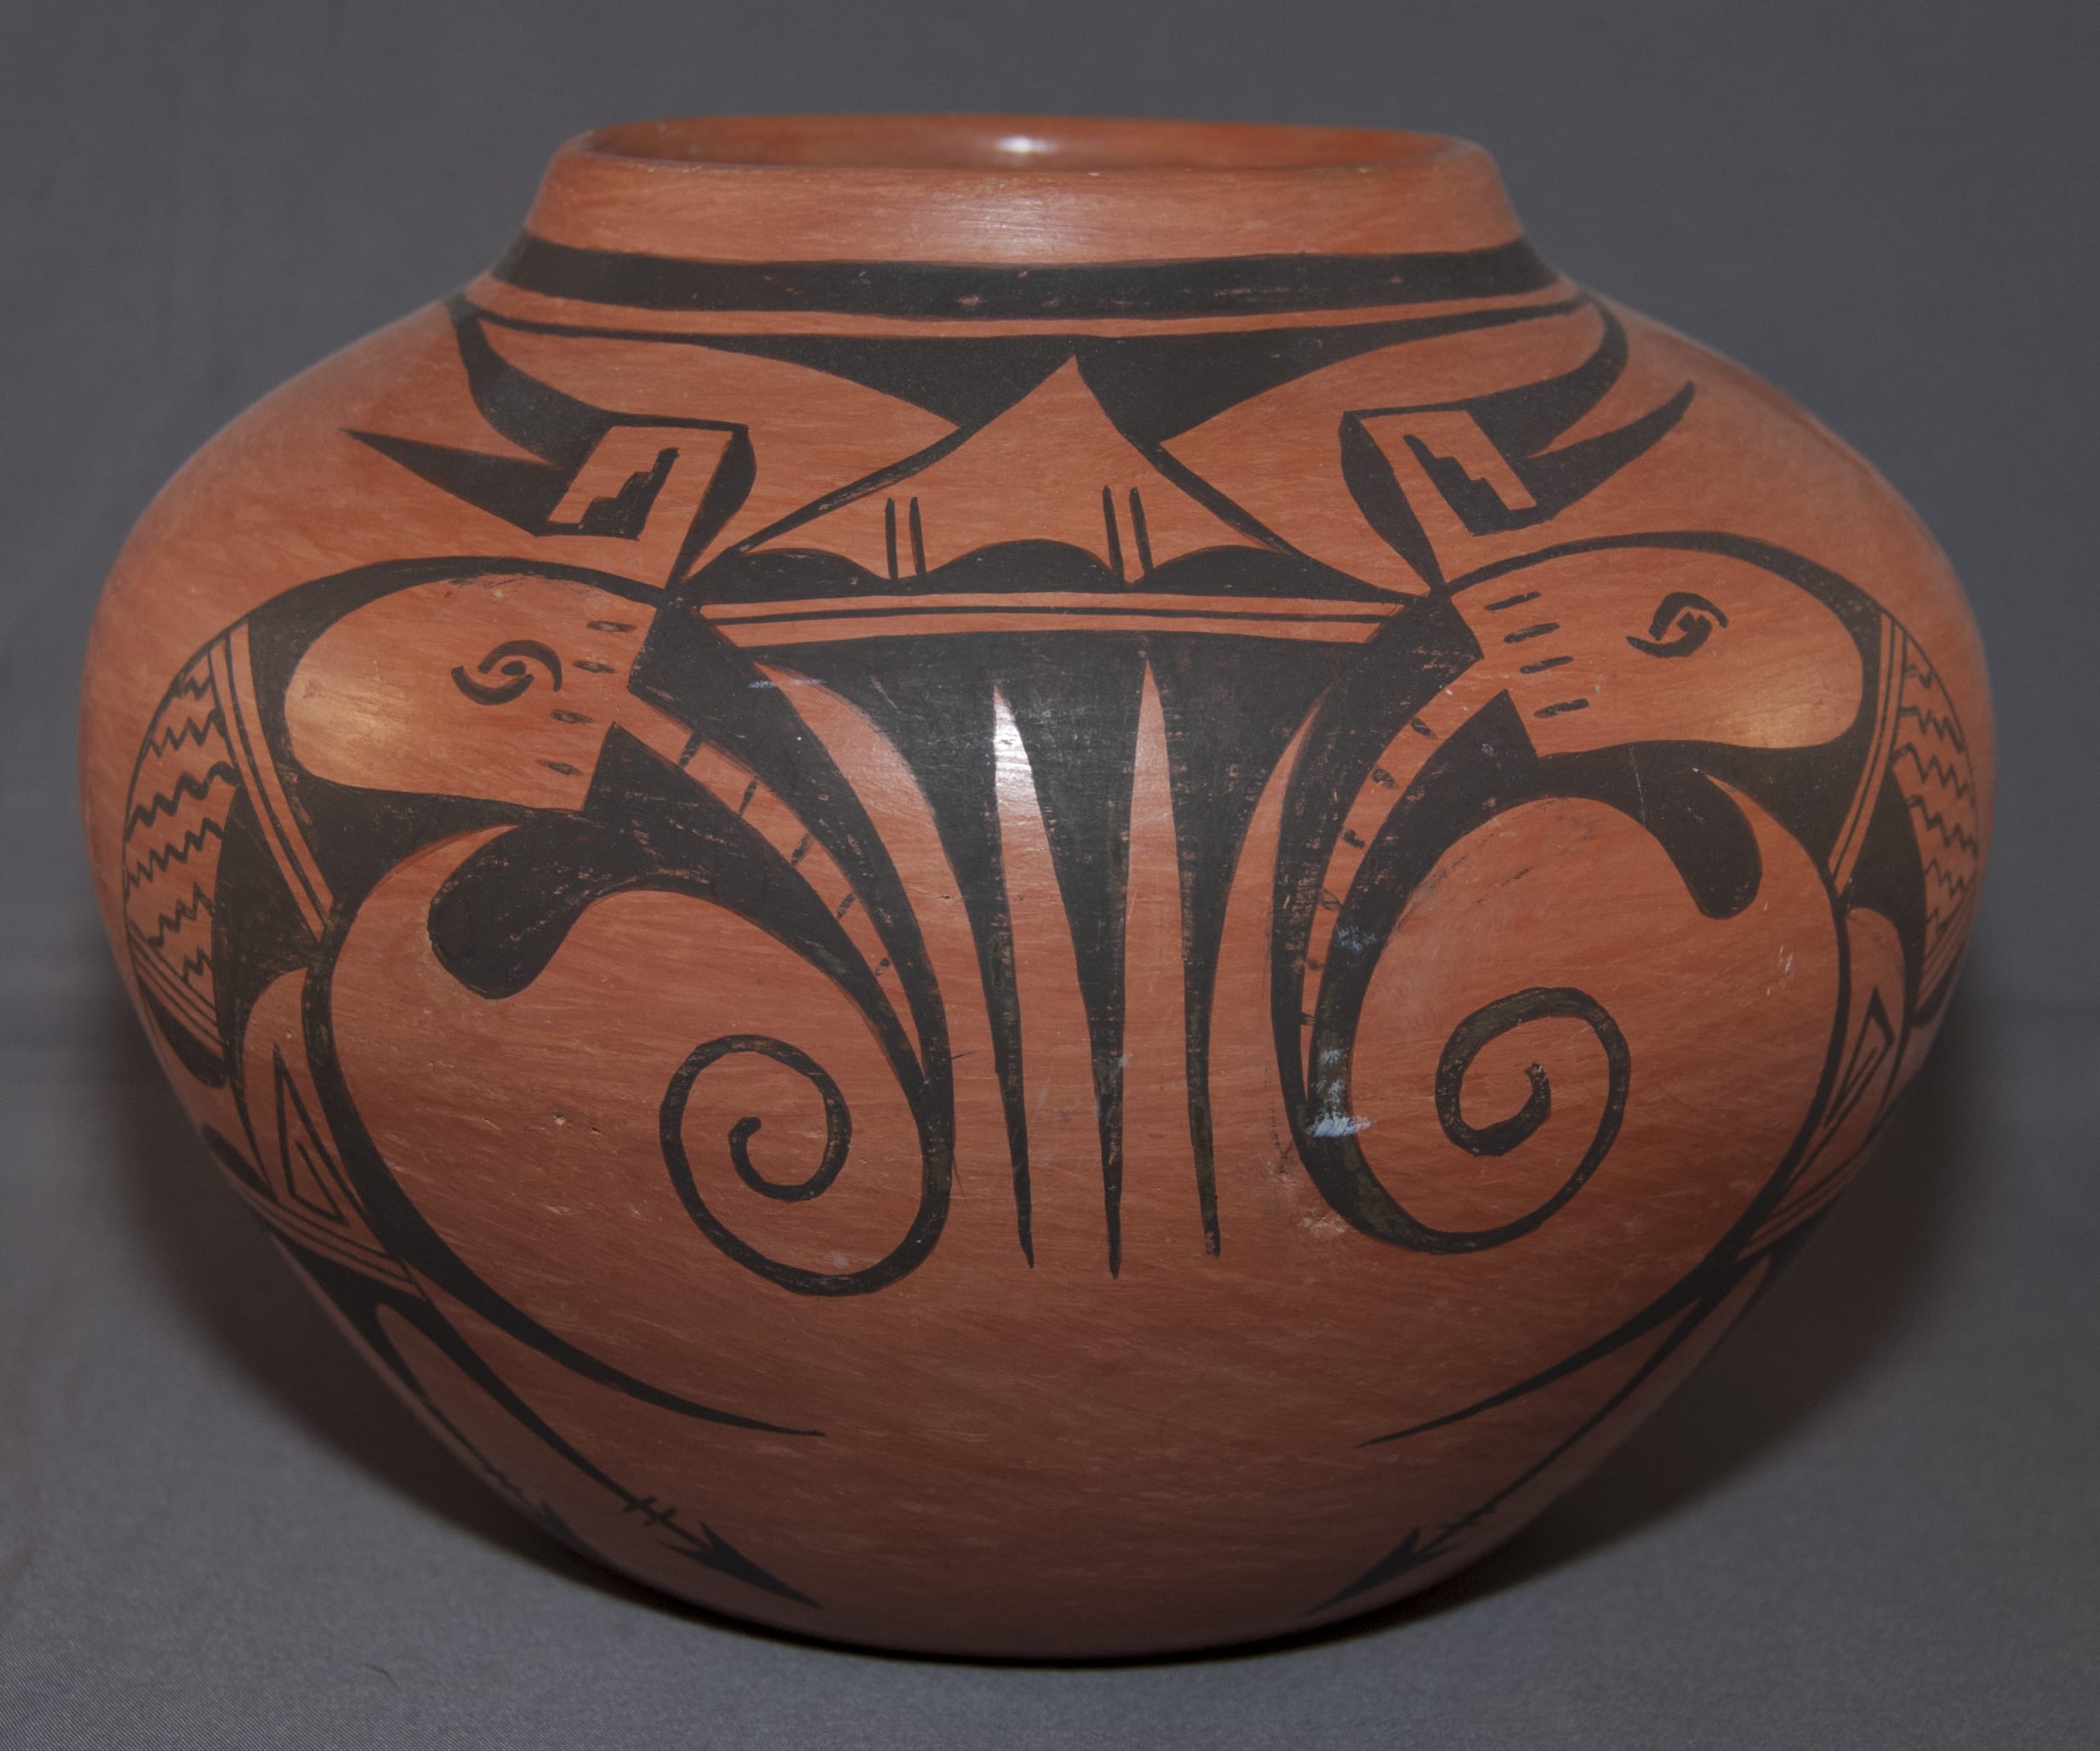 2011-15 Large Redware Pot With Monochromatic Two-Bird Design